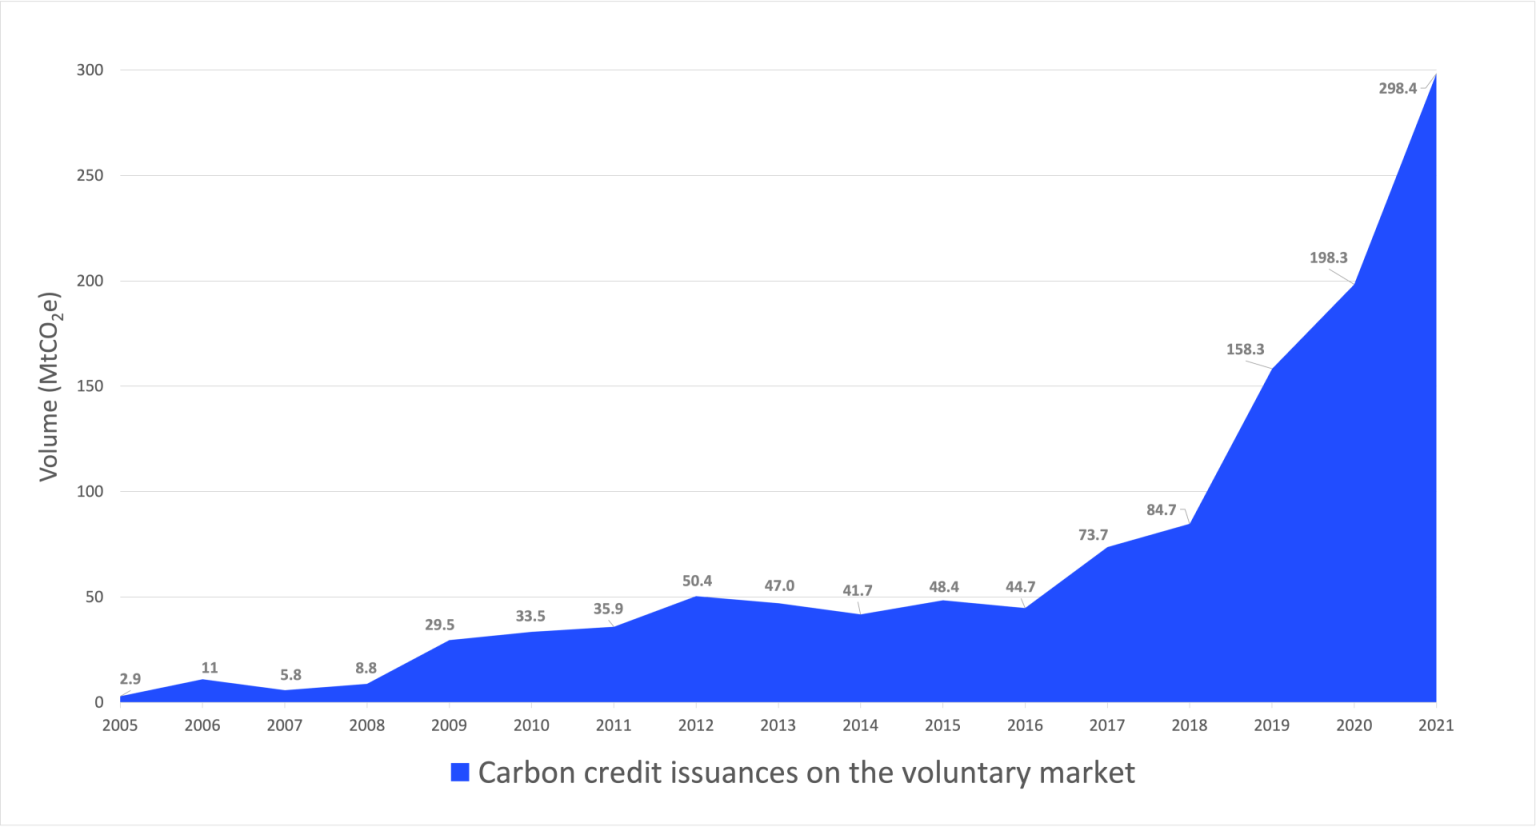 Figure 1: The size of the voluntary carbon market. Based on data from the Ecosystem Marketplace